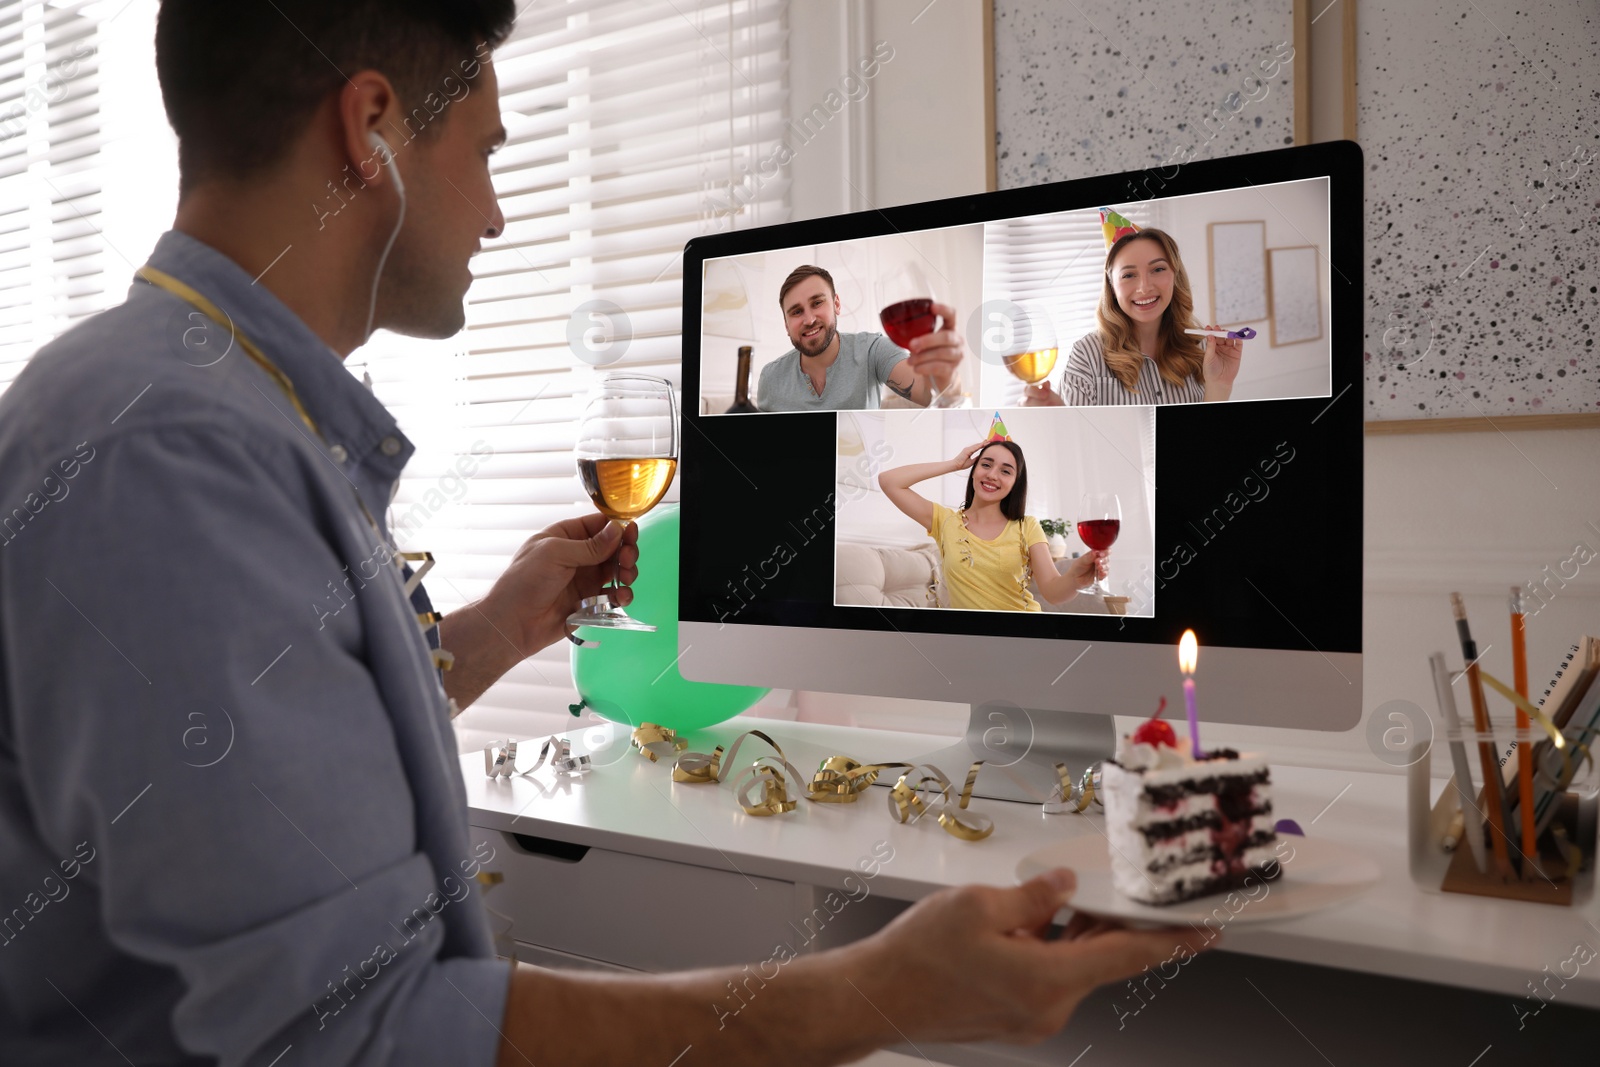 Image of Man with glass of wine and cake having online party via computer at home during quarantine lockdown